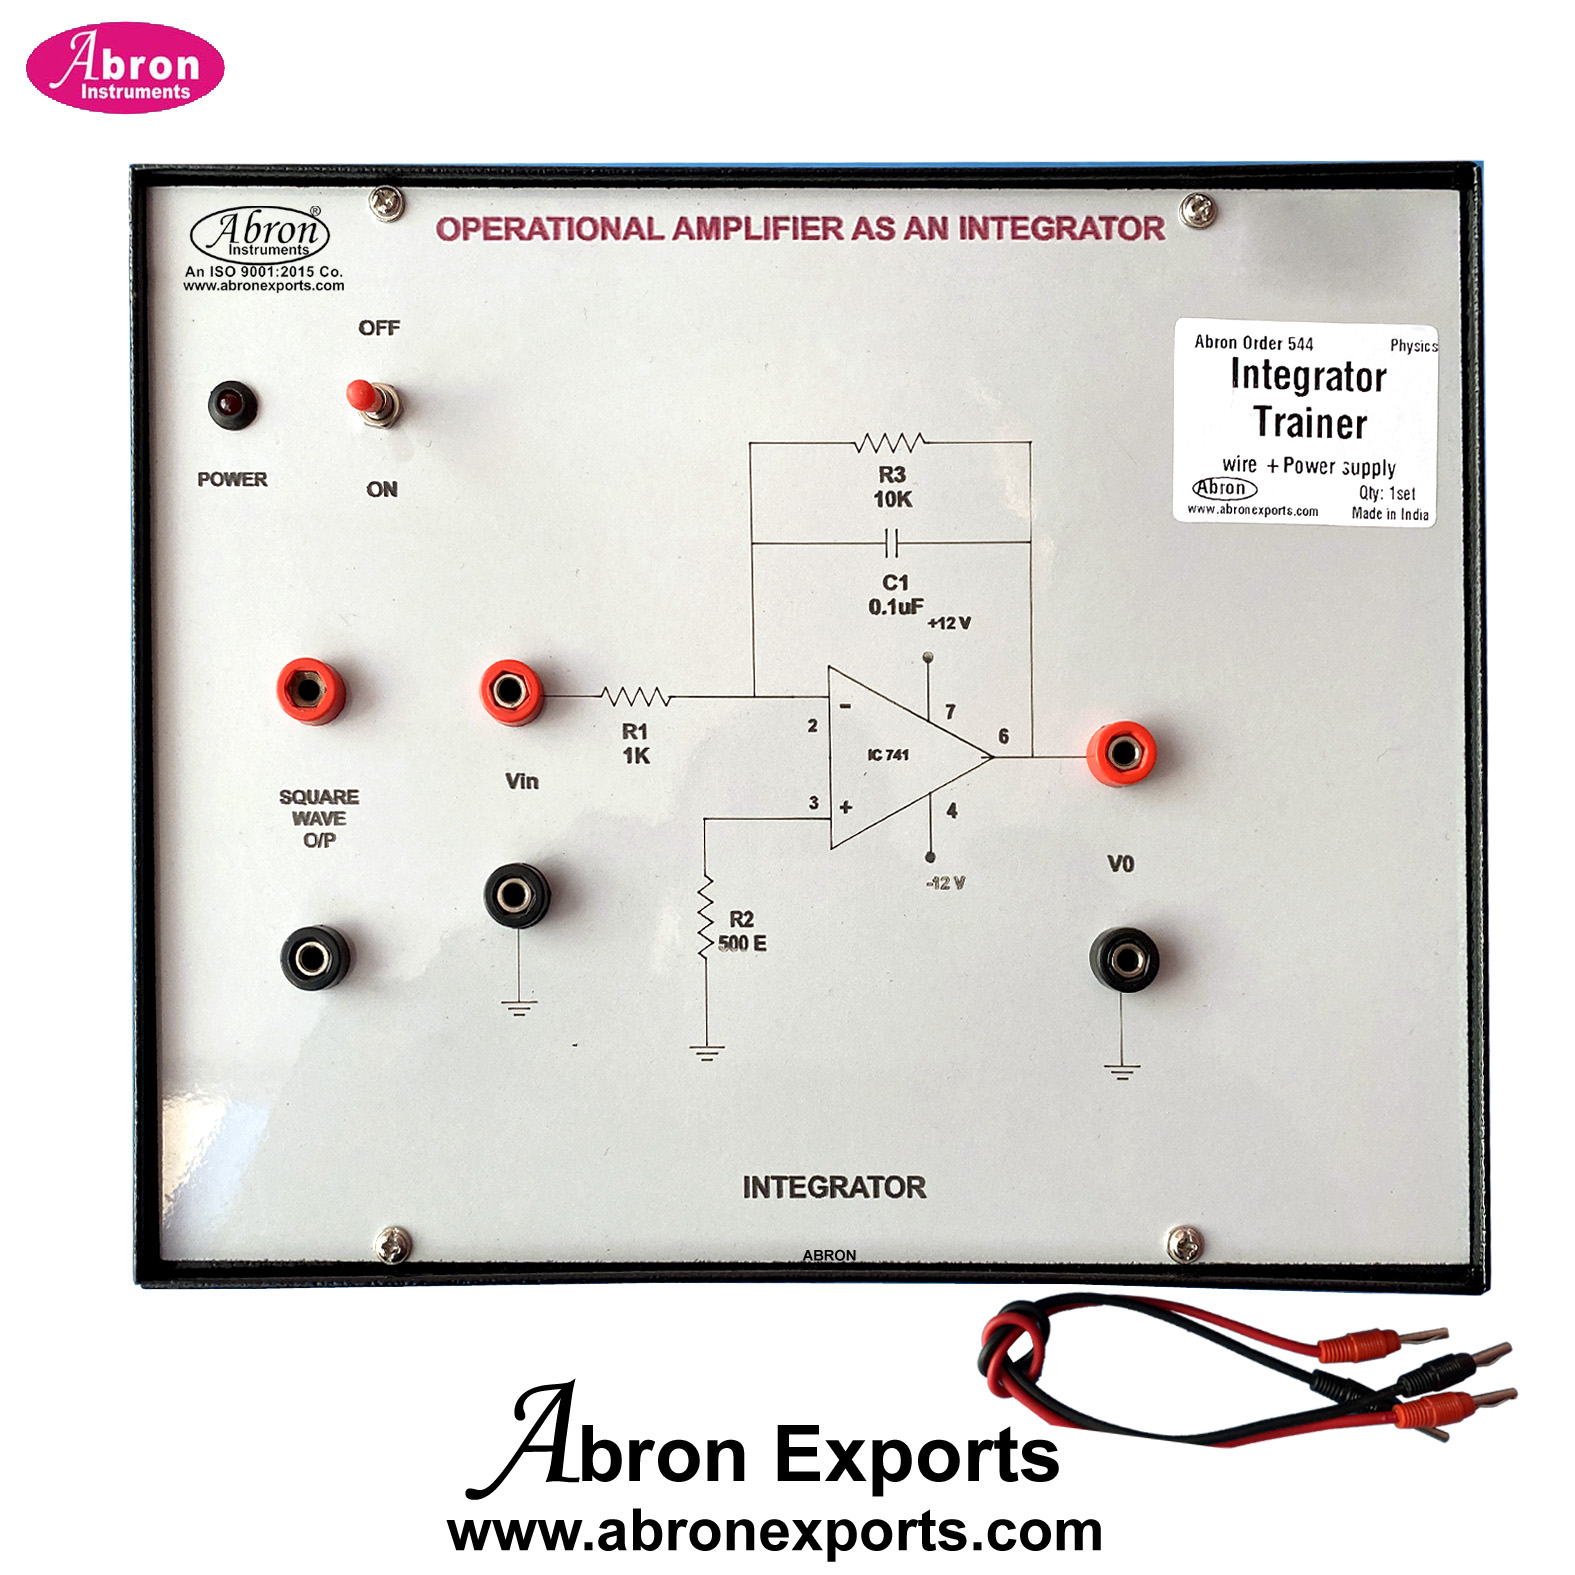 Study Operational Amplifier Integrating Defferentiating Output to Study on CRO Training Board Supply Abron AE-1249B 